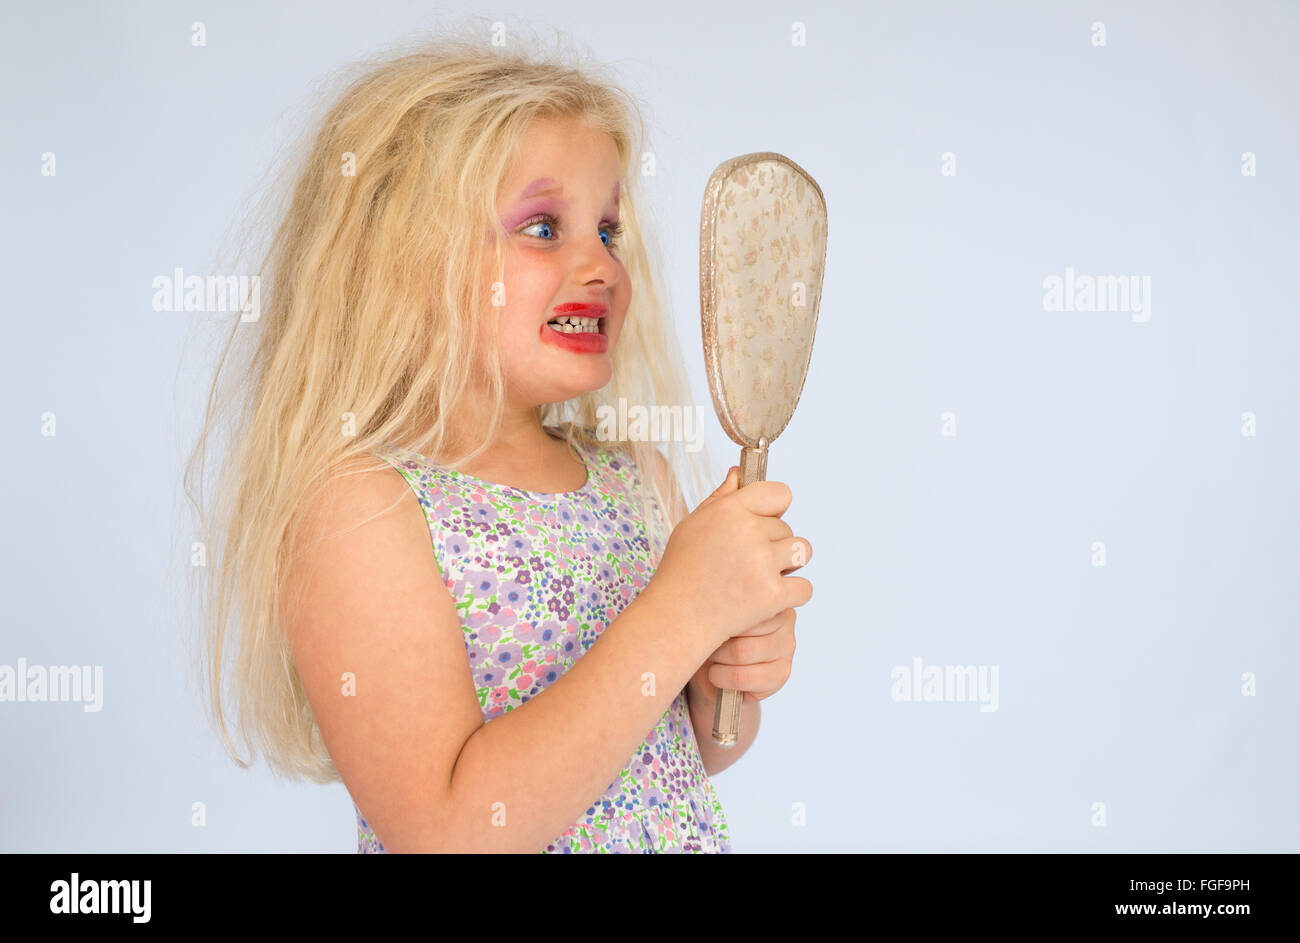 Young girl with blonde hair wearing smudged make up looking surprised at herself in the mirror Stock Photo